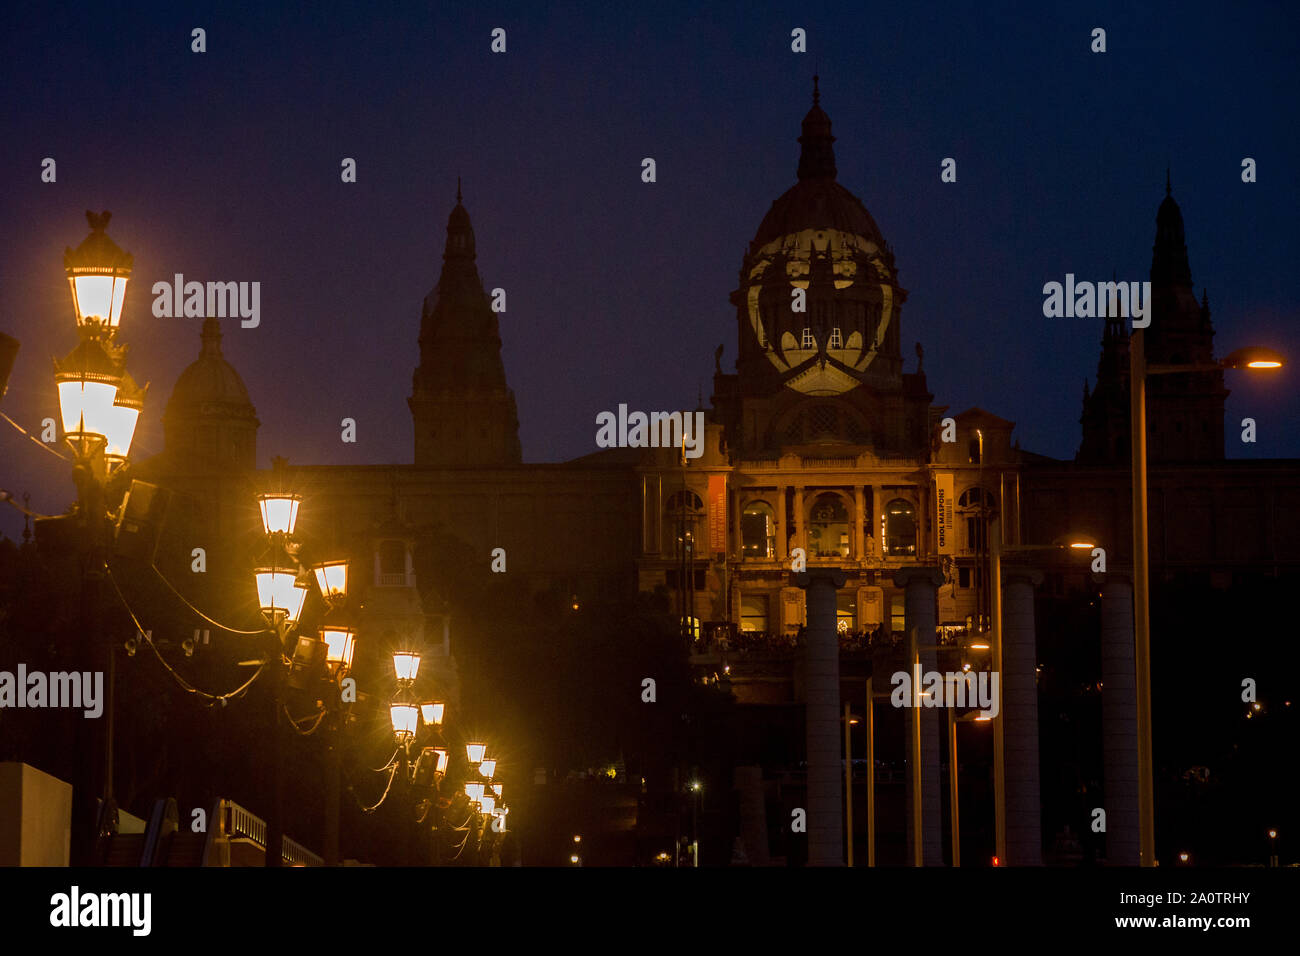 Batman Bat signal appears projected on the facade of the  Palau Nacional de Montjuic in Barcelona on occasion of the character’s 80th anniversary. Stock Photo